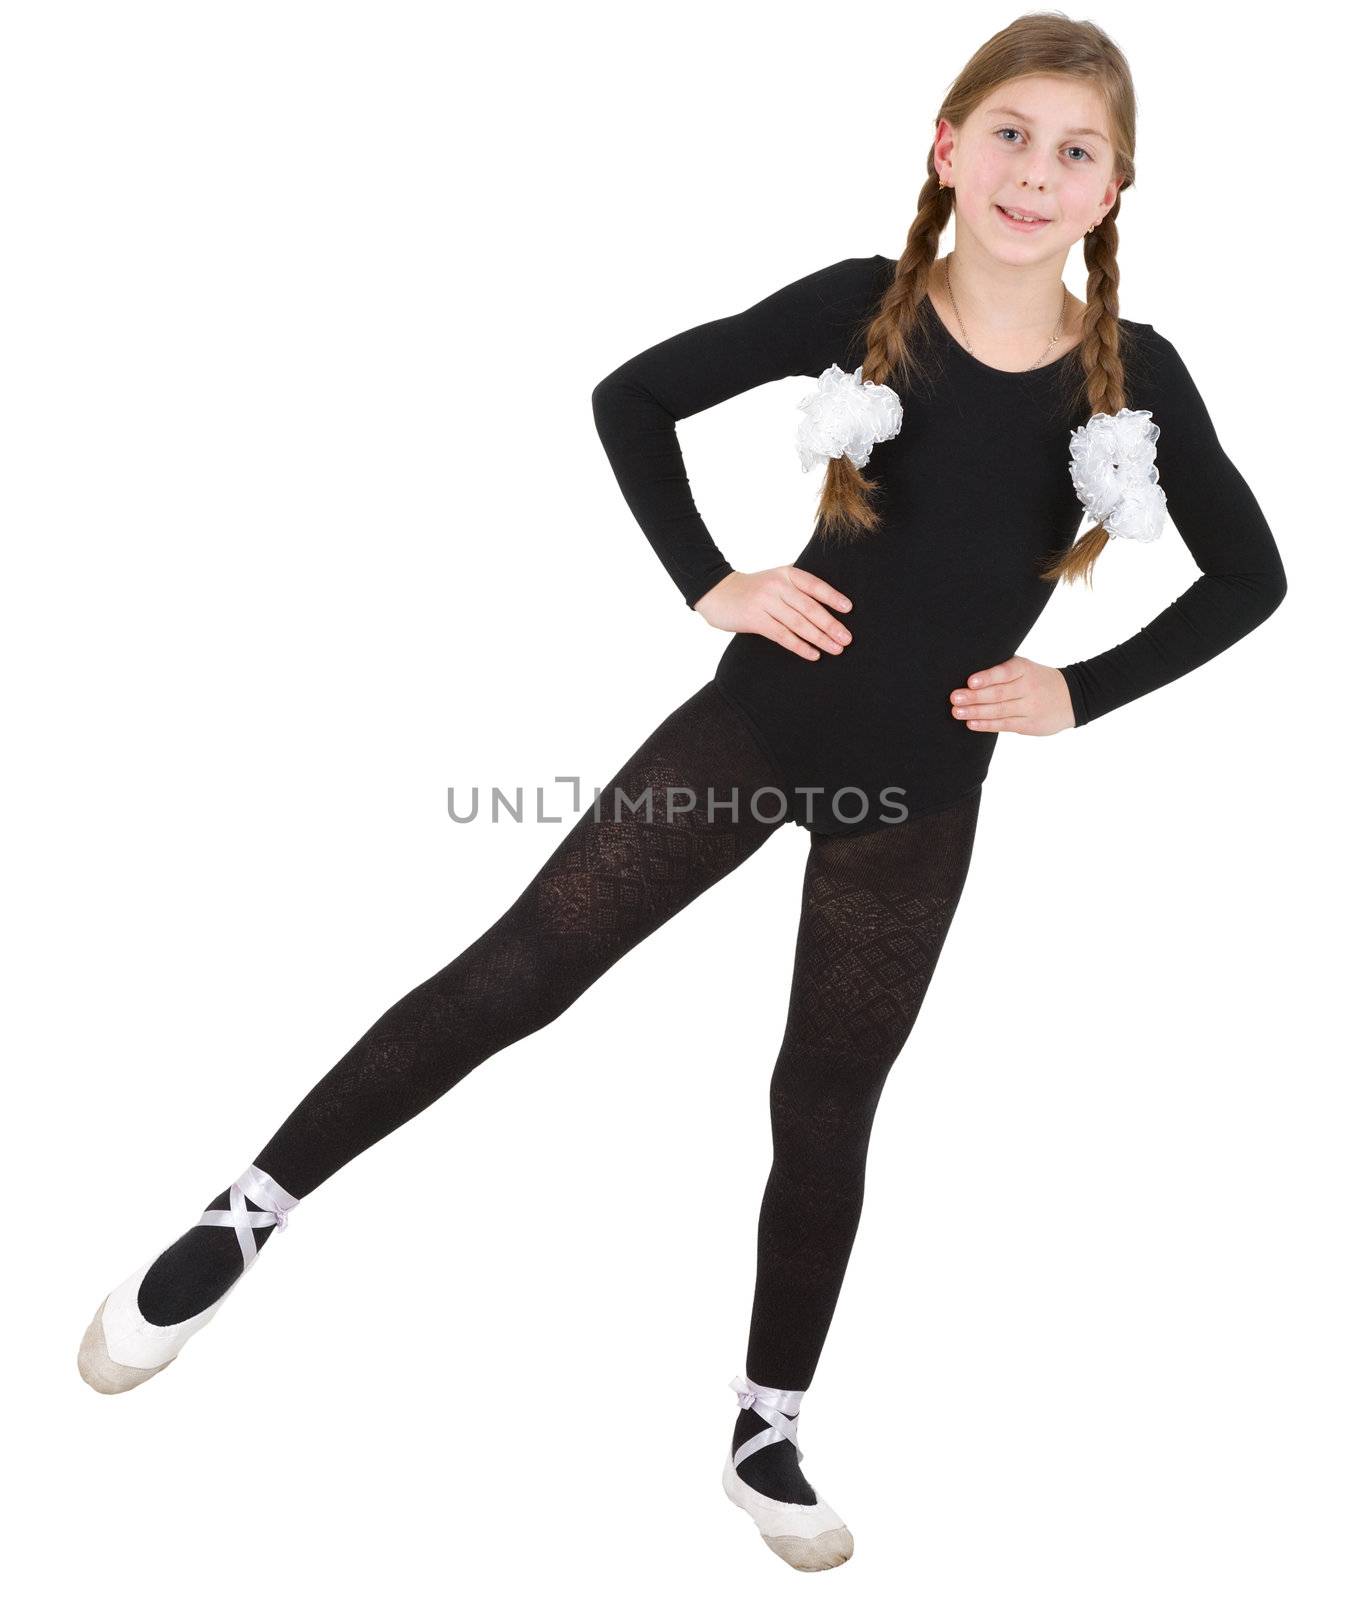 Ballerina in black tights on the white background